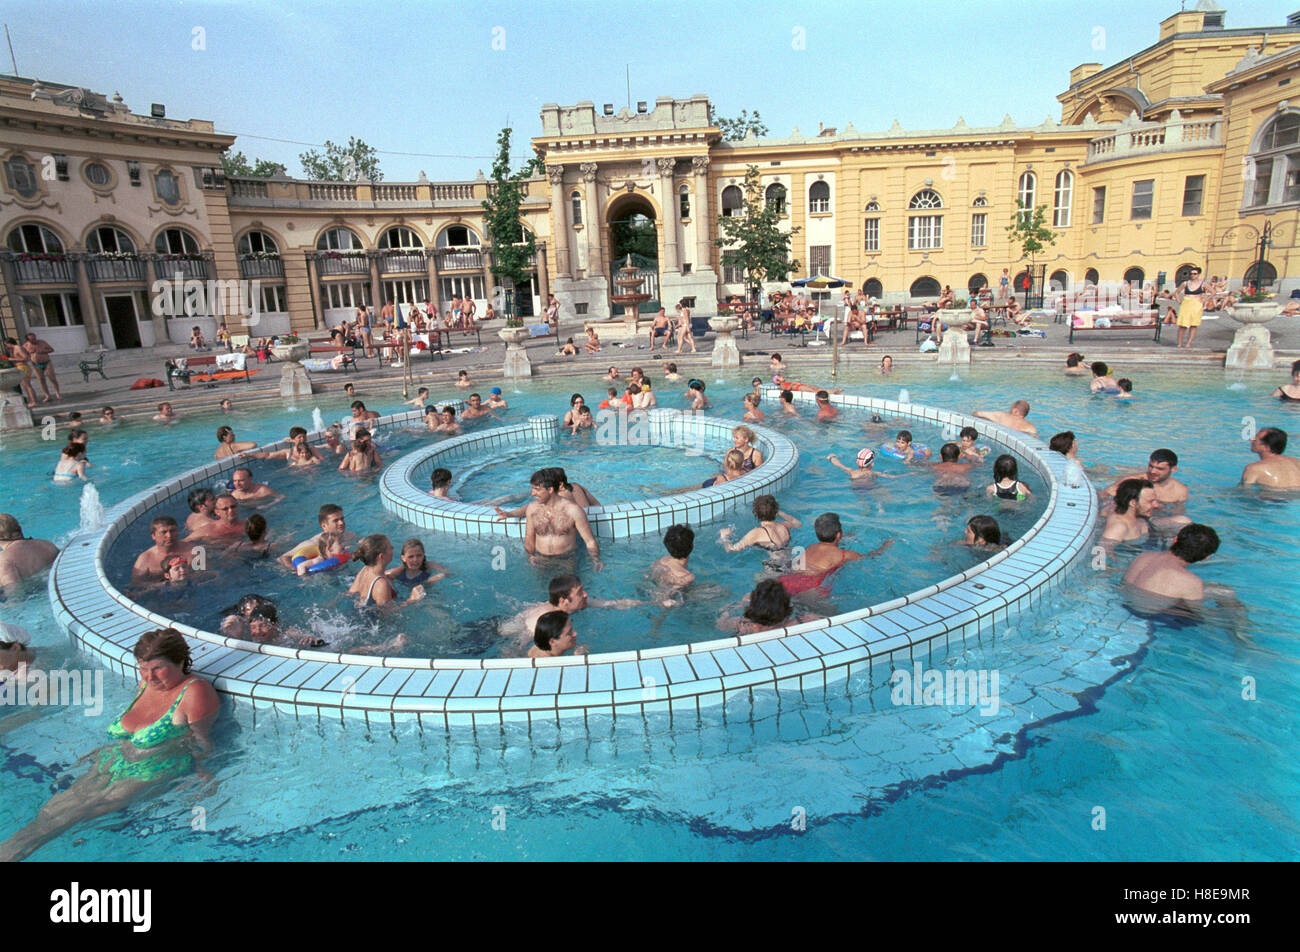 HUNGARY Budapest, Széchenyi Thermal bath, which is heated by geothermal hot water / UNGARN Budapest, Széchenyi Thermalbad, die Baeder werden mit geothermischen heissem Wasser betrieben Stock Photo